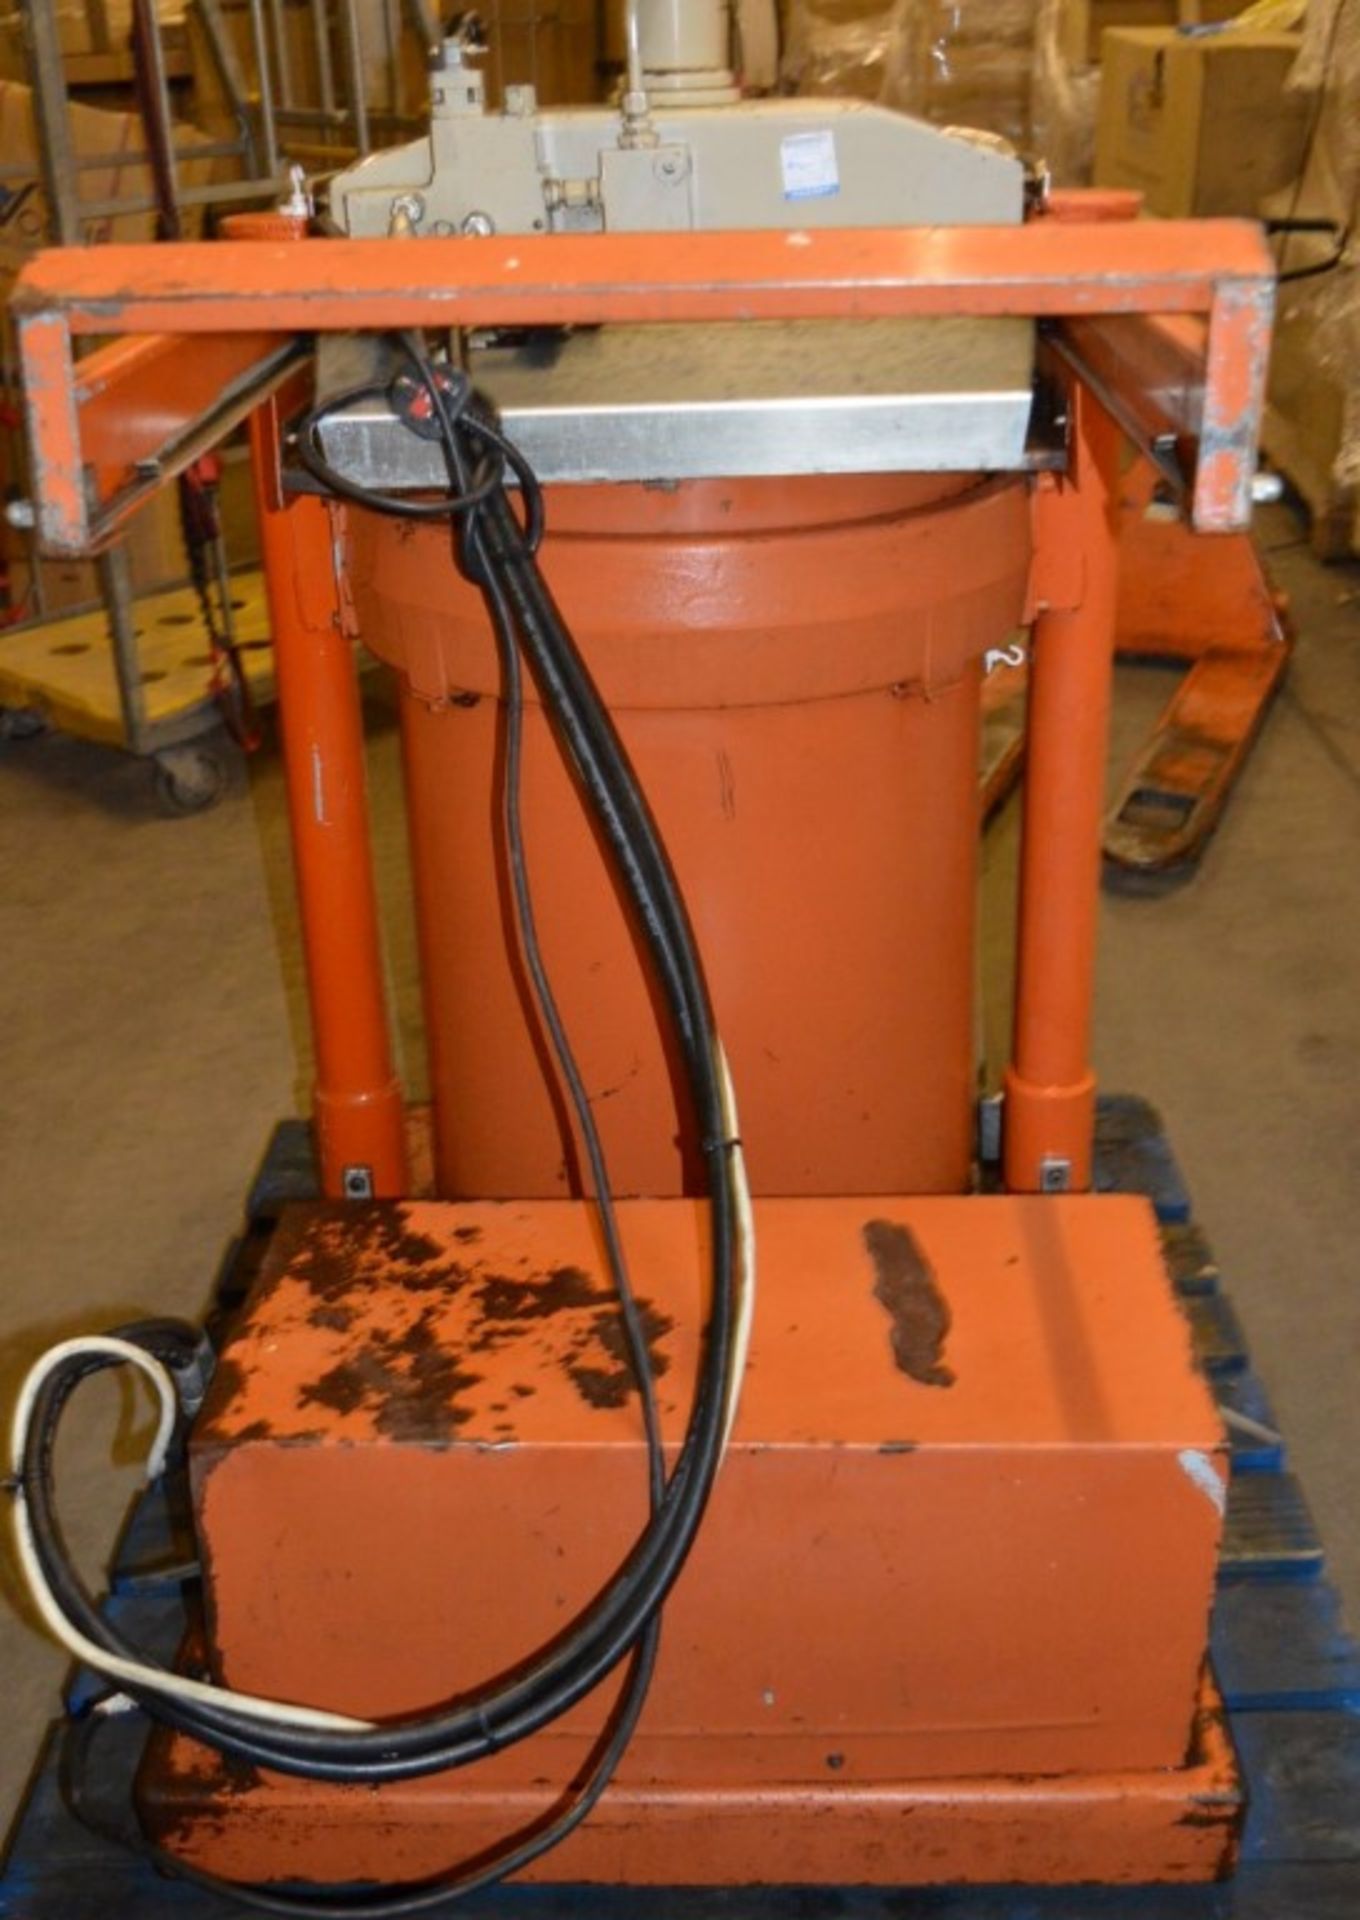 1 x Orwak 5030 Waste Compactor Bailer - Used For Compacting Recyclable or Non-Recyclable Waste - - Image 4 of 4